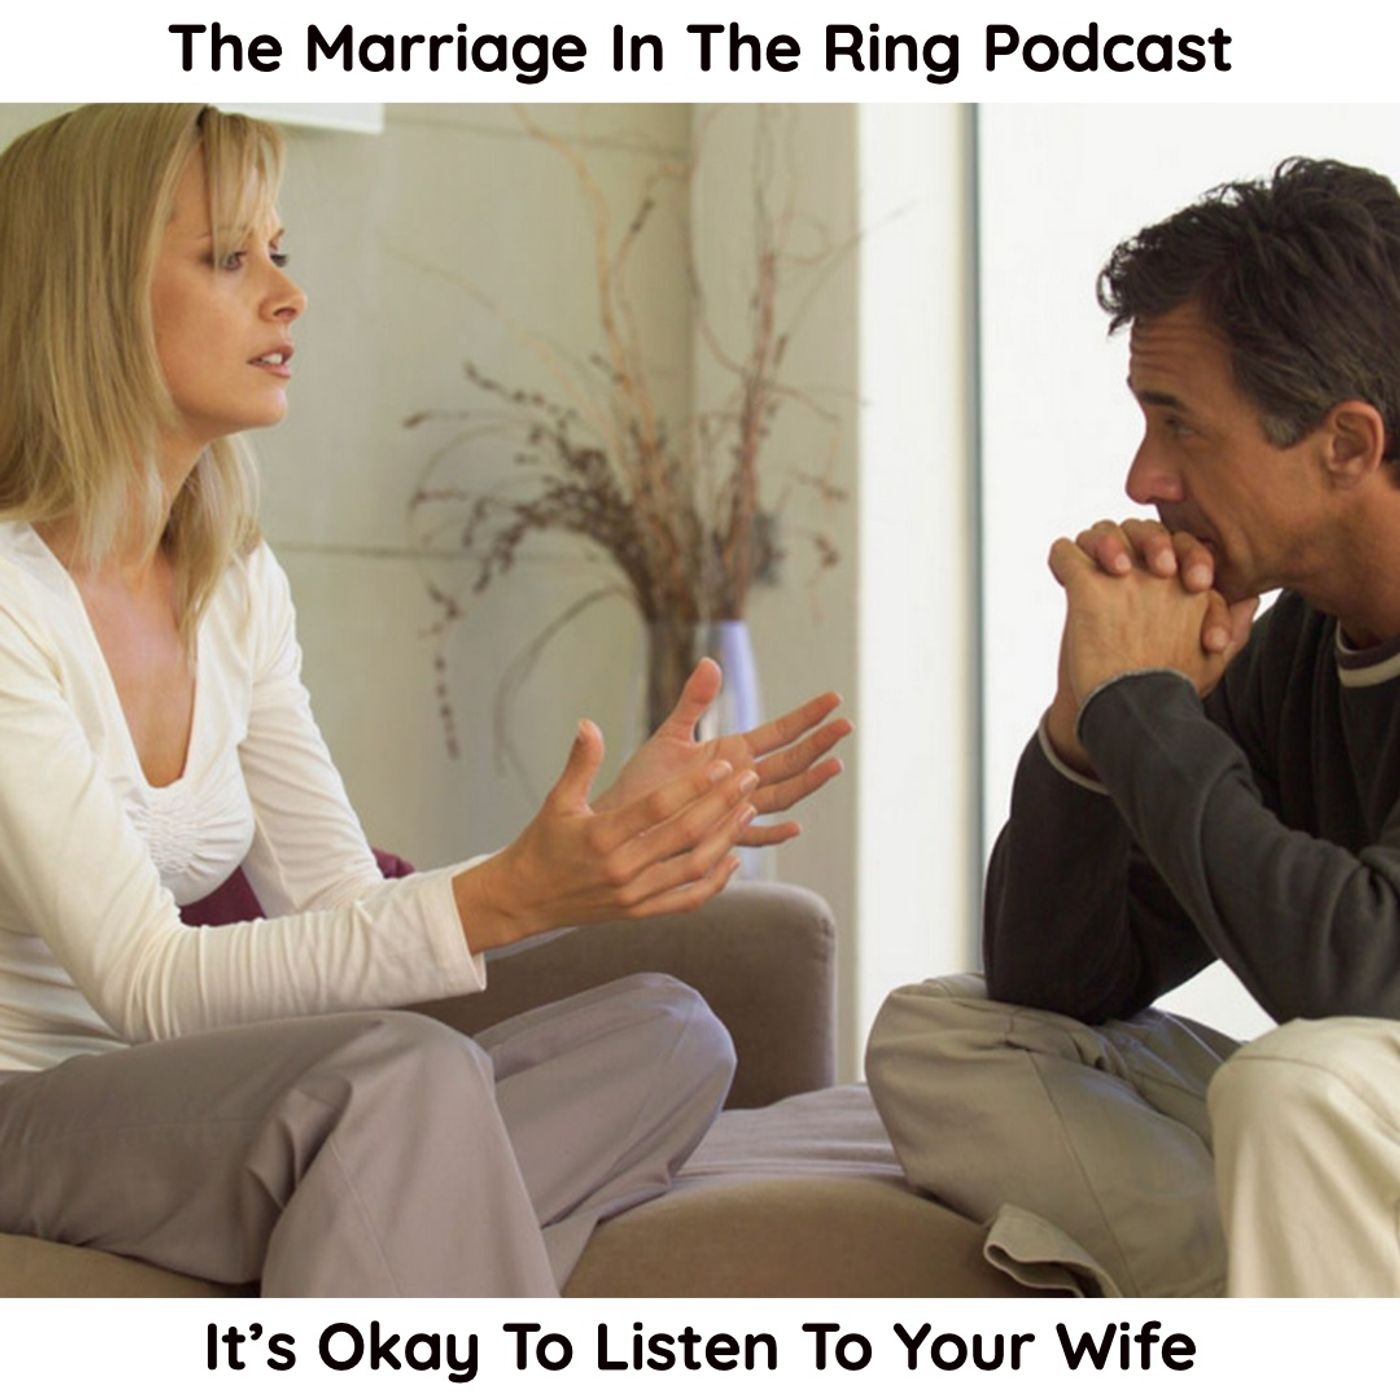 It's Okay To Listen To Your Wife